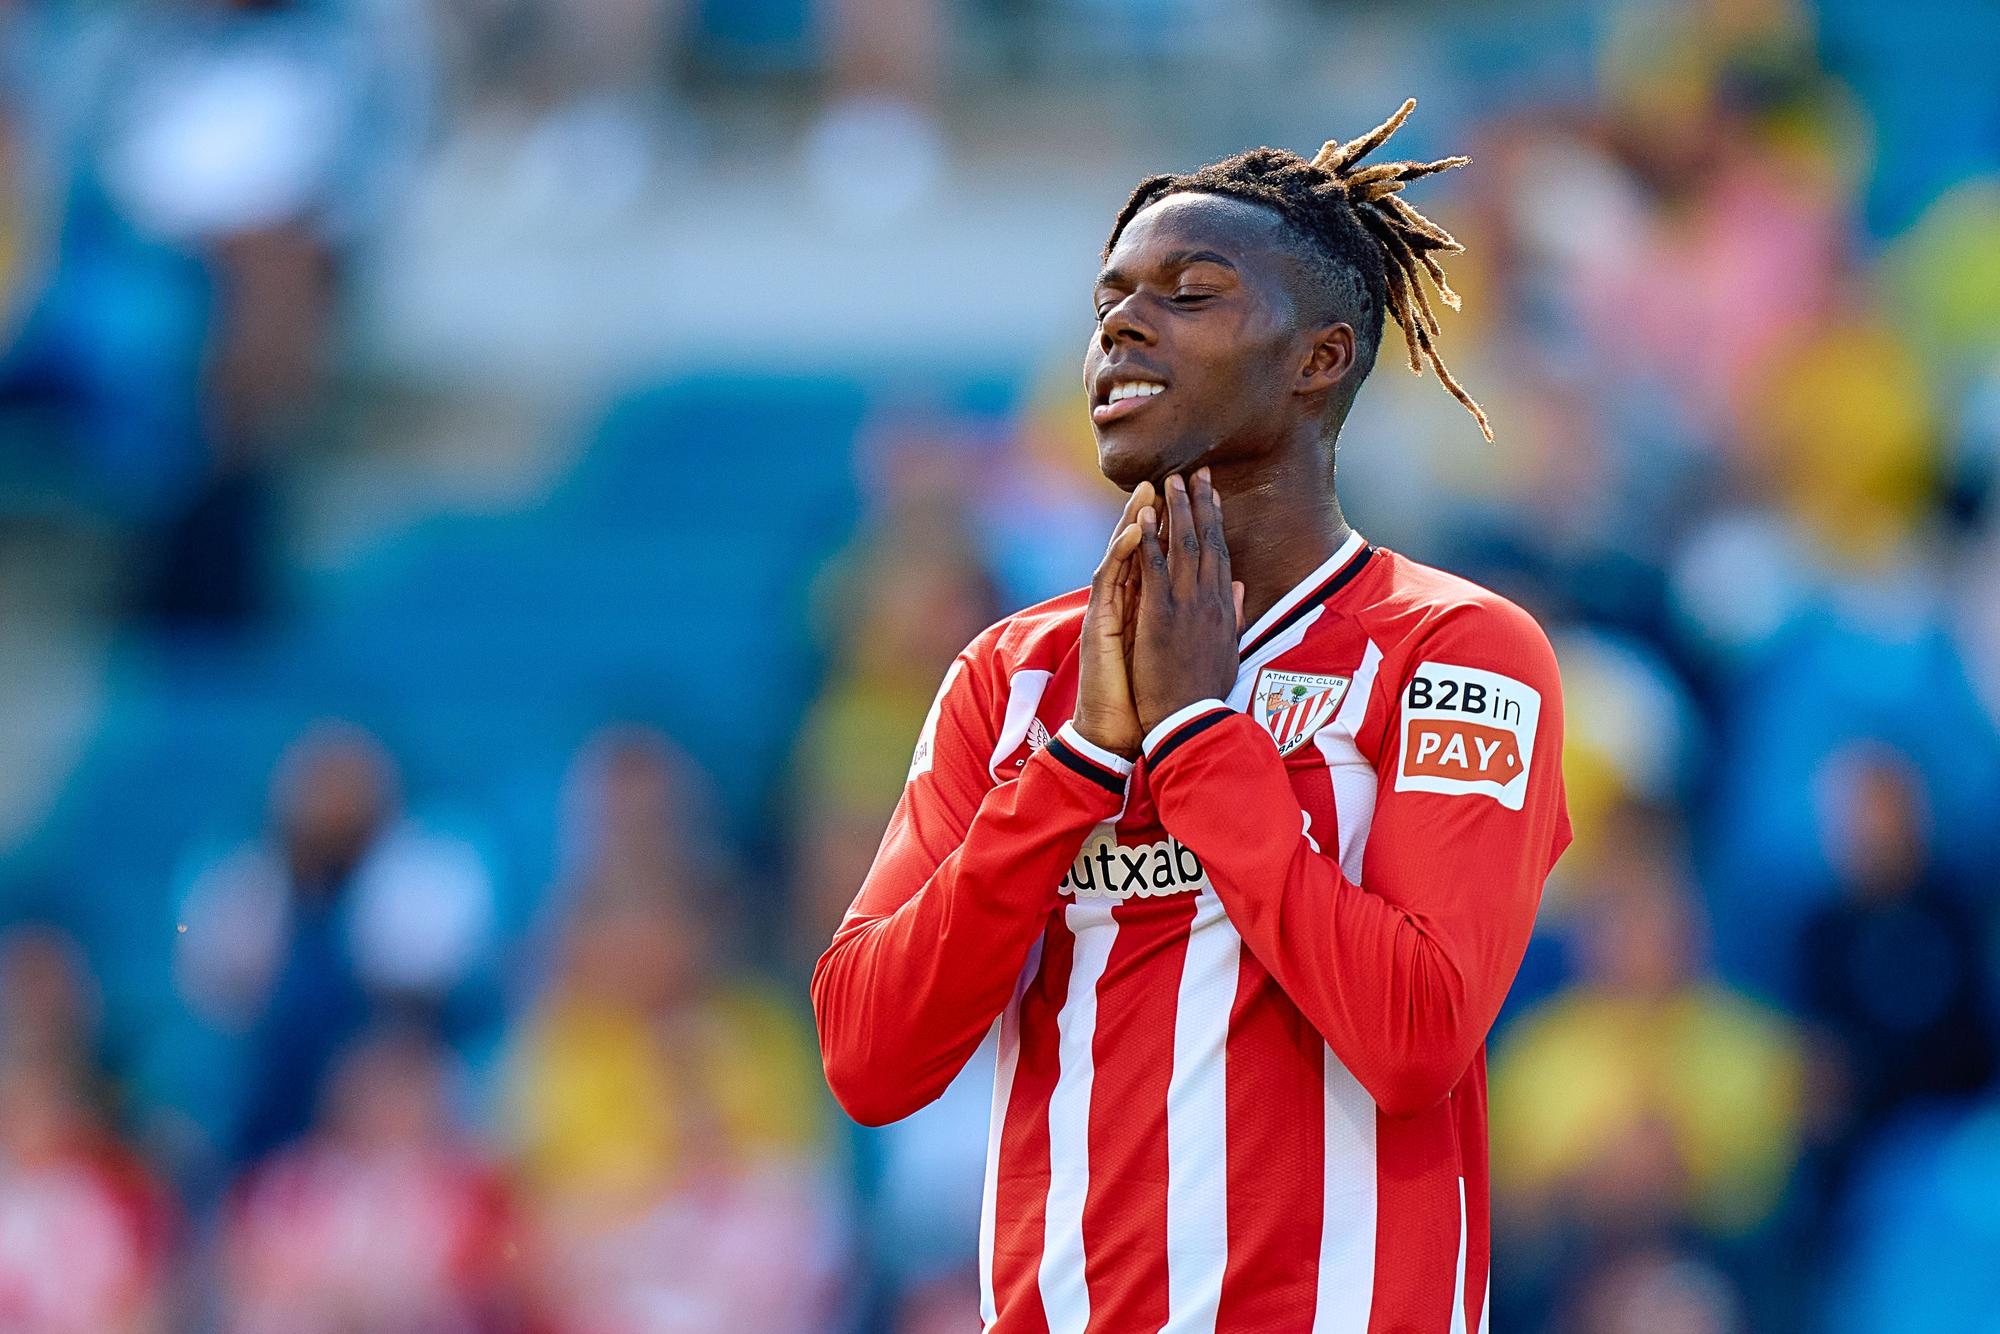 Nico Williams of Athletic Club reacts during the Spanish league, La Liga EA Sports, football match played between UD Las Palmas and Athletic Club at Estadio Gran Canaria on March 10, 2024, in Las Palmas de Gran Canaria, Spain. AFP7 10/03/2024 ONLY FOR USE IN SPAIN / Gabriel Jimenez / AFP7 / Europa Press;2024;SOCCER;Sport;ZSOCCER;ZSPORT;UD Las Palmas v Athletic Club - La Liga EA Sports;